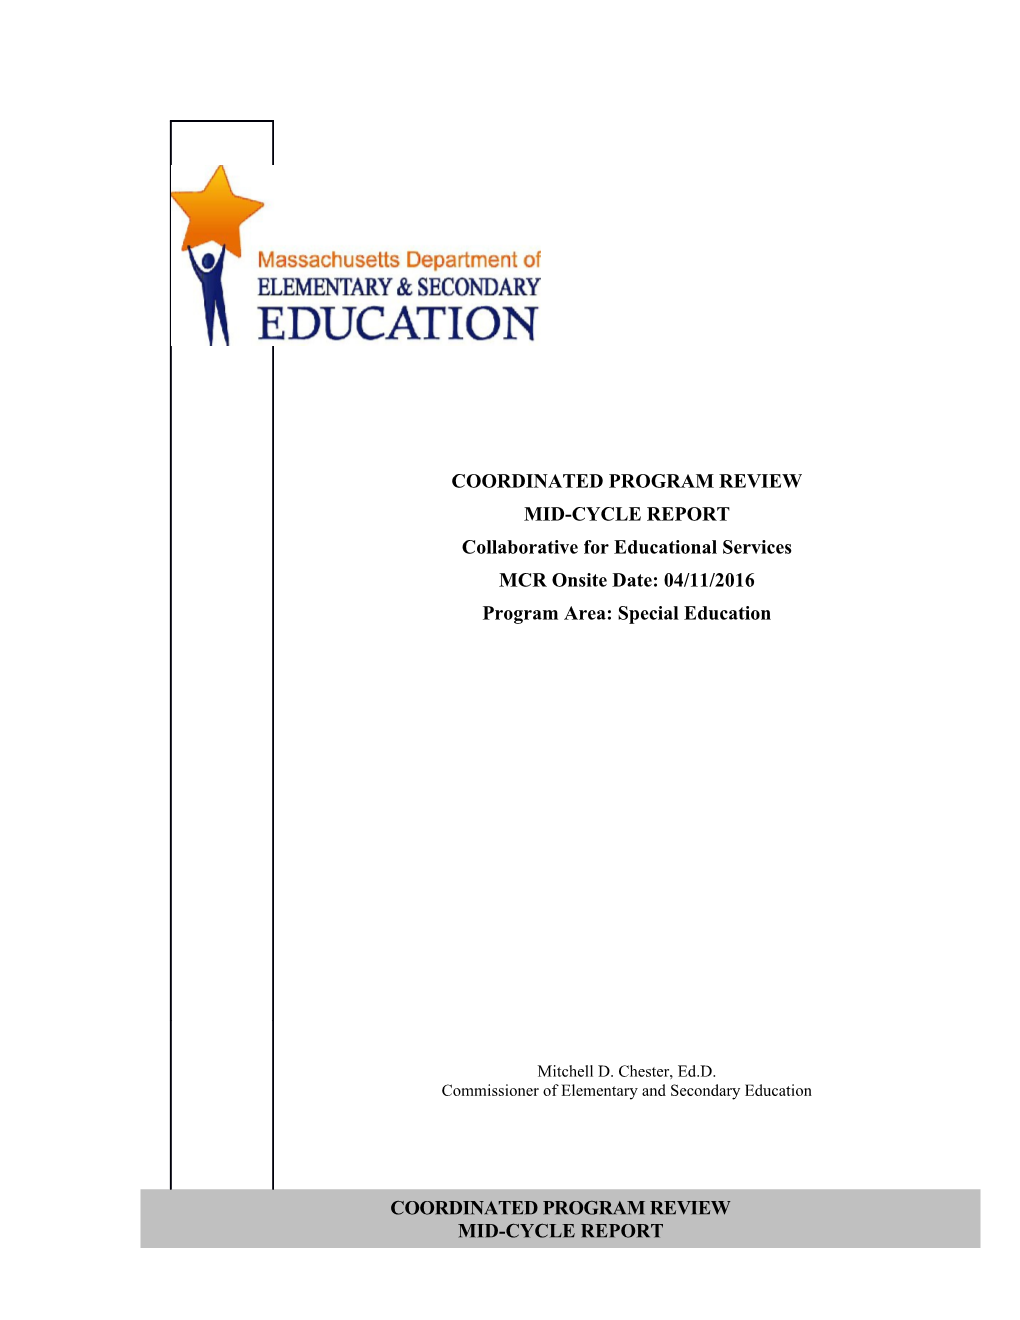 Collaborative for Educational Services Mid-Cycle Report 2016